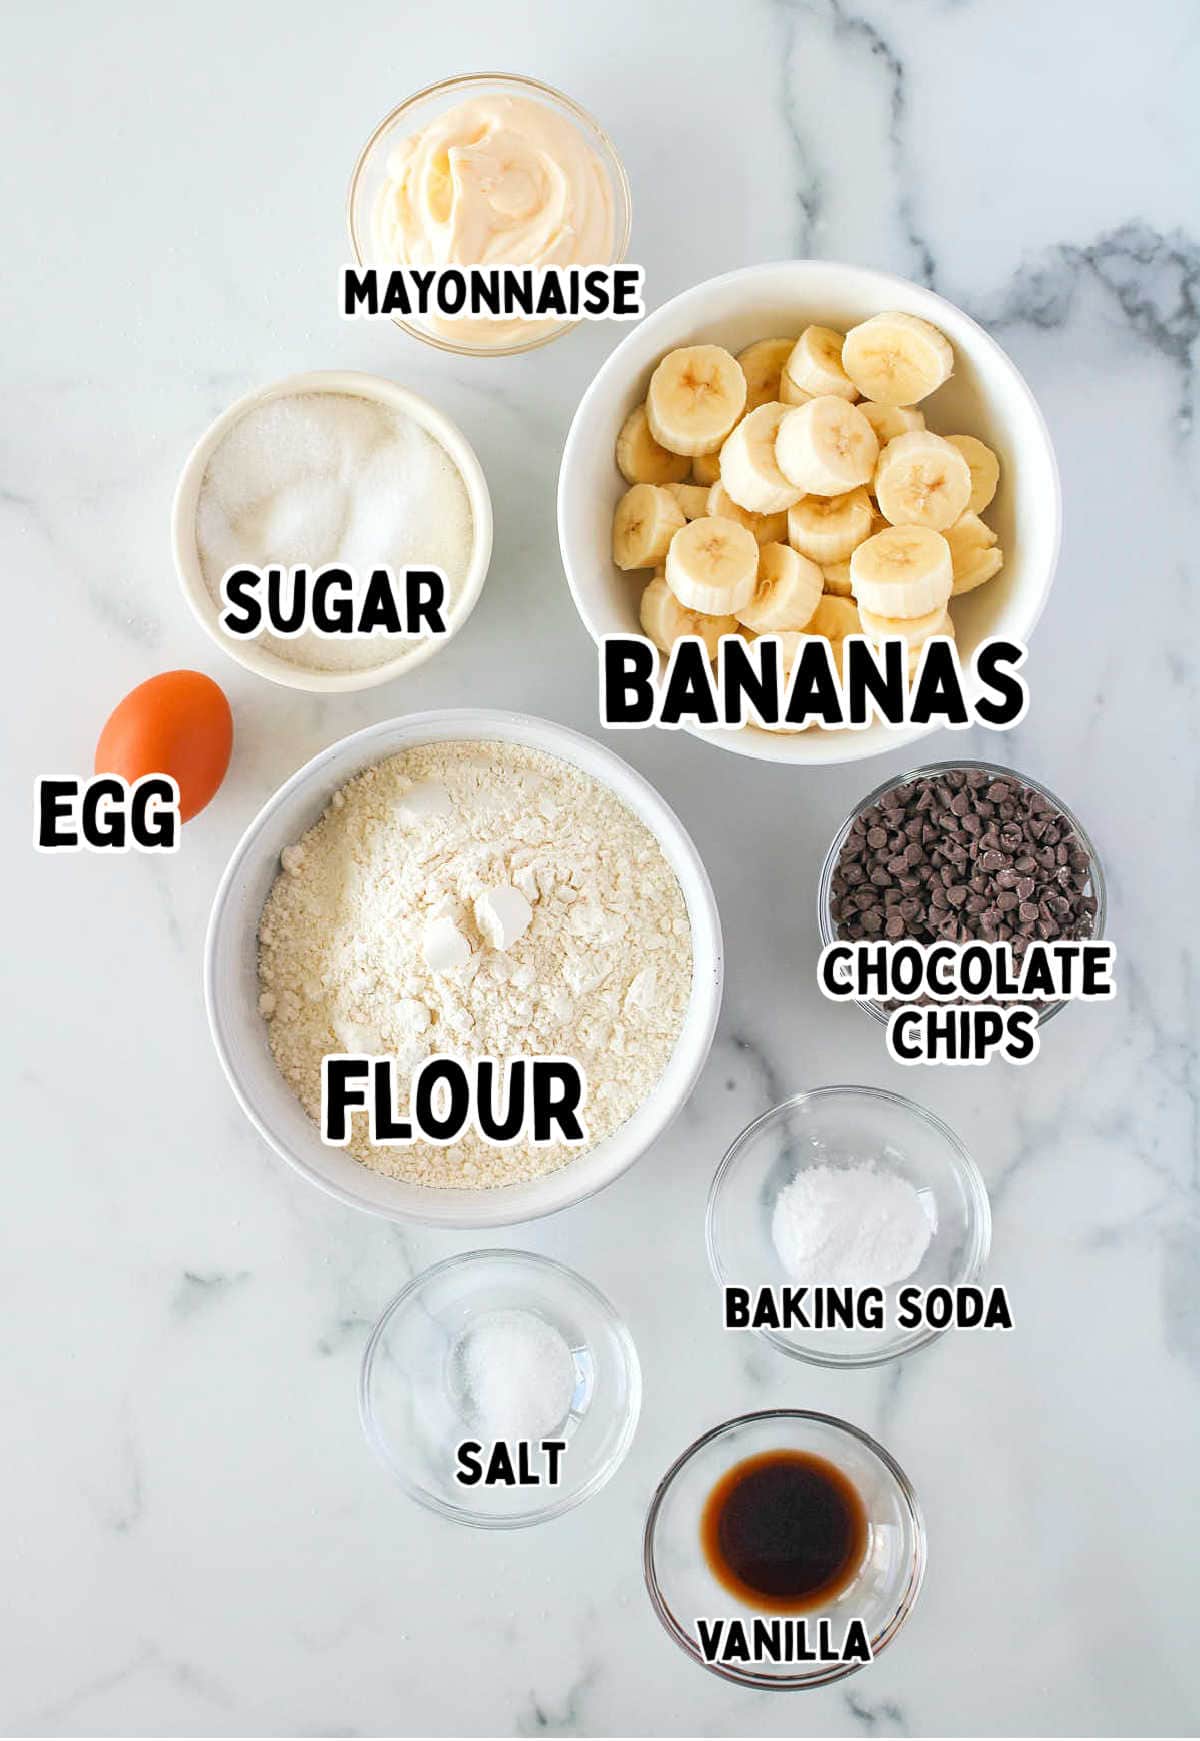 Ingredients needed to make a Chocolate Chip Banana Bread.